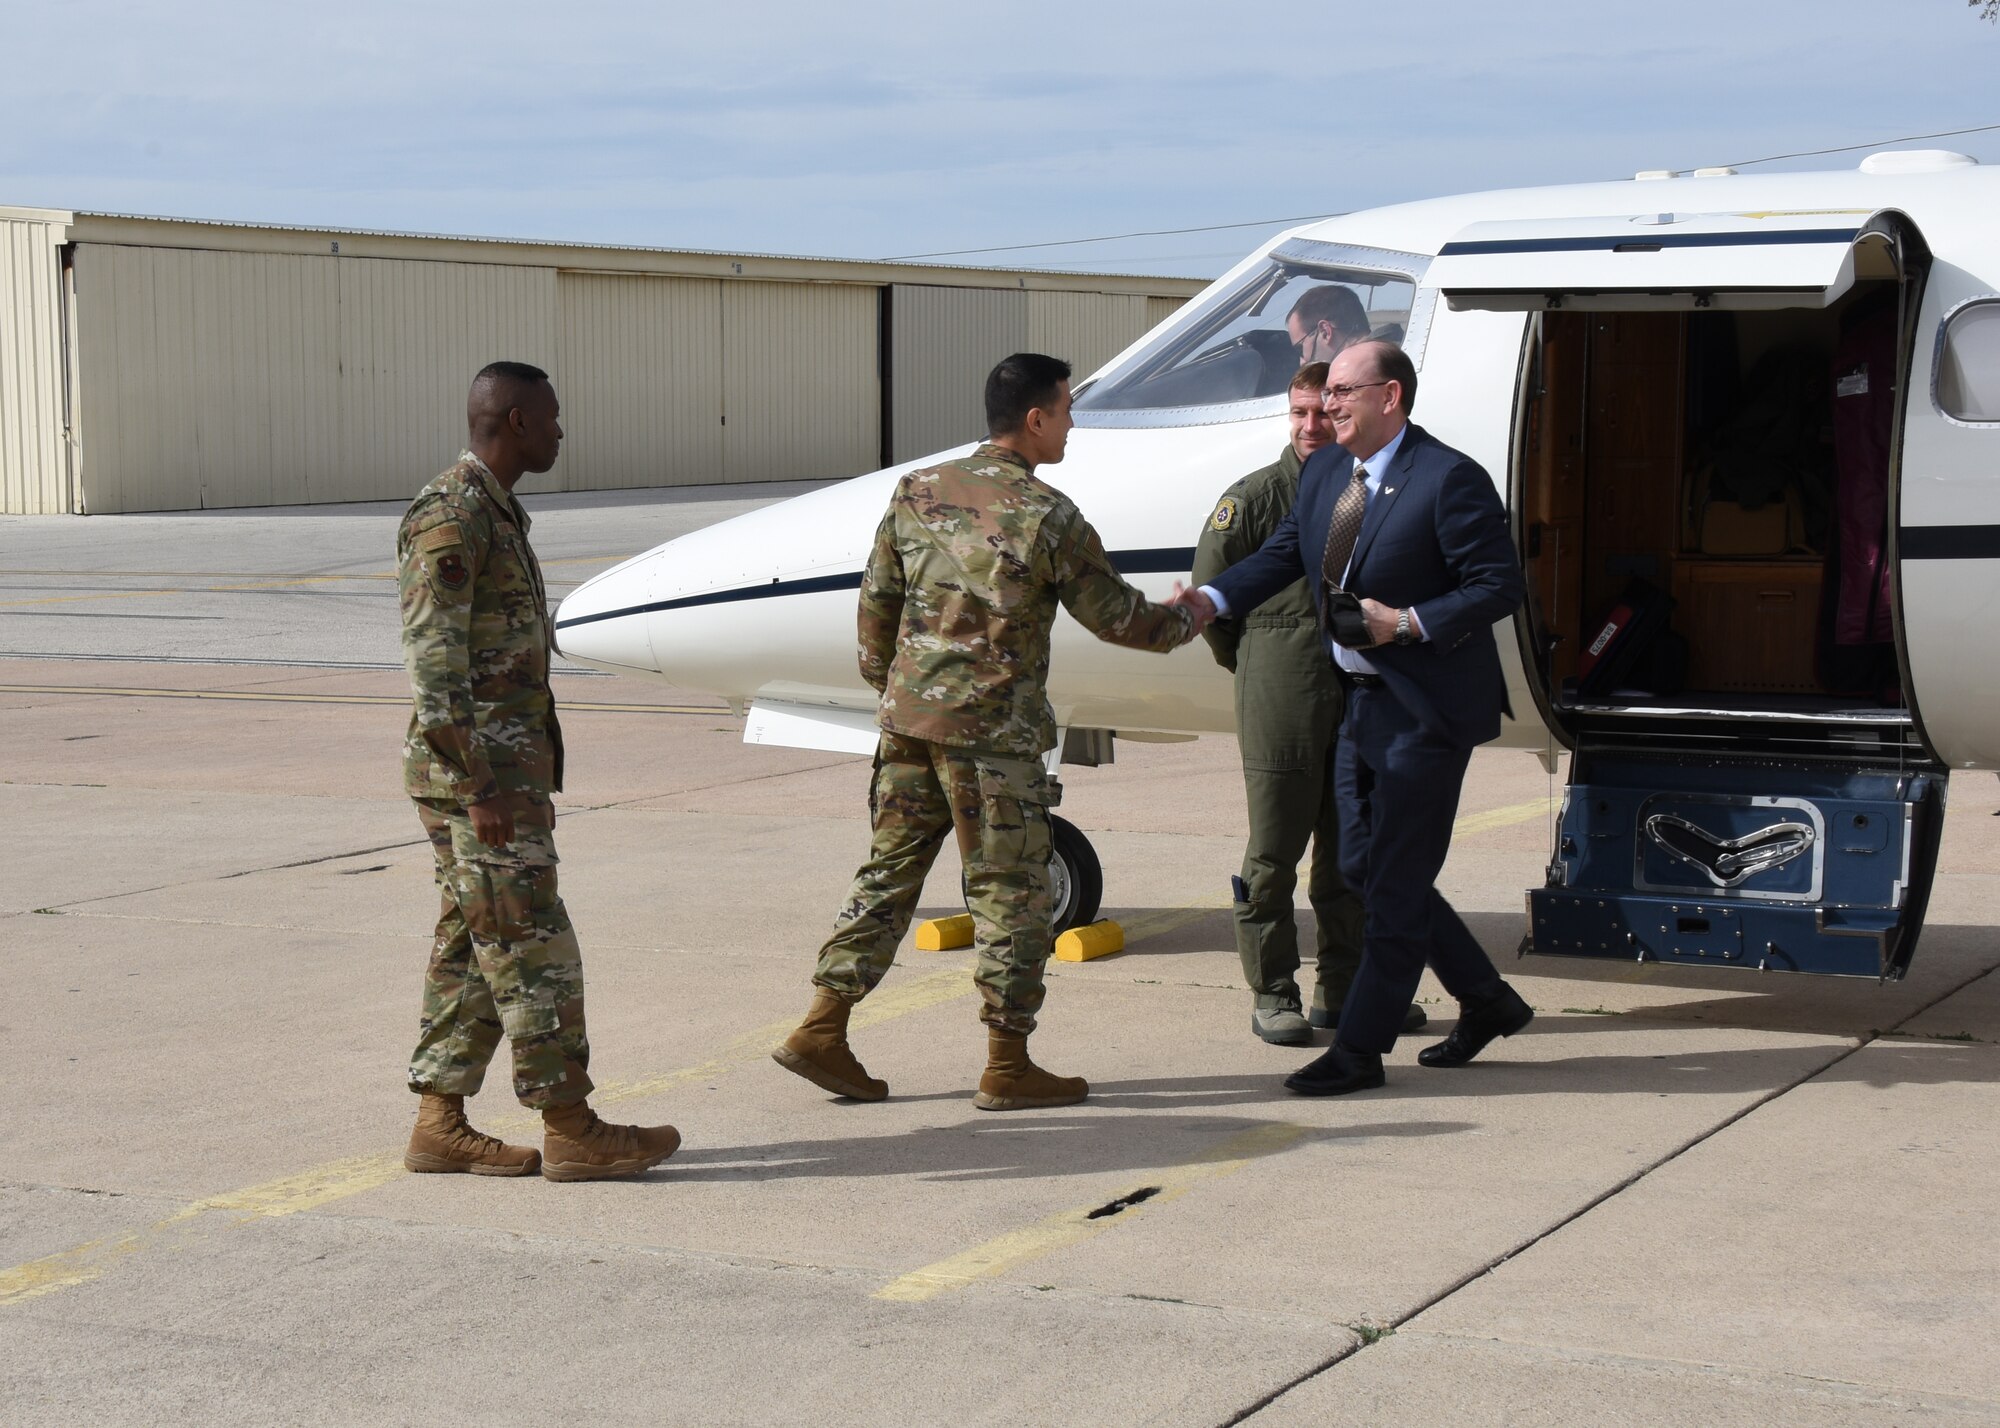 U.S. Air Force Col. Ricky Mills, 17th Training Wing commander, greets Under Secretary of the Air Force Matthew P. Donovan at Goodfellow Air Force Base, Texas, Feb. 13, 2019. Goodfellow was the first stop on Donovan’s tour of Air Education Training Command bases to see how they build a lethal and ready force through innovation and training. (U.S. Air Force photo by Airman 1st Class Zachary Chapman/Released)